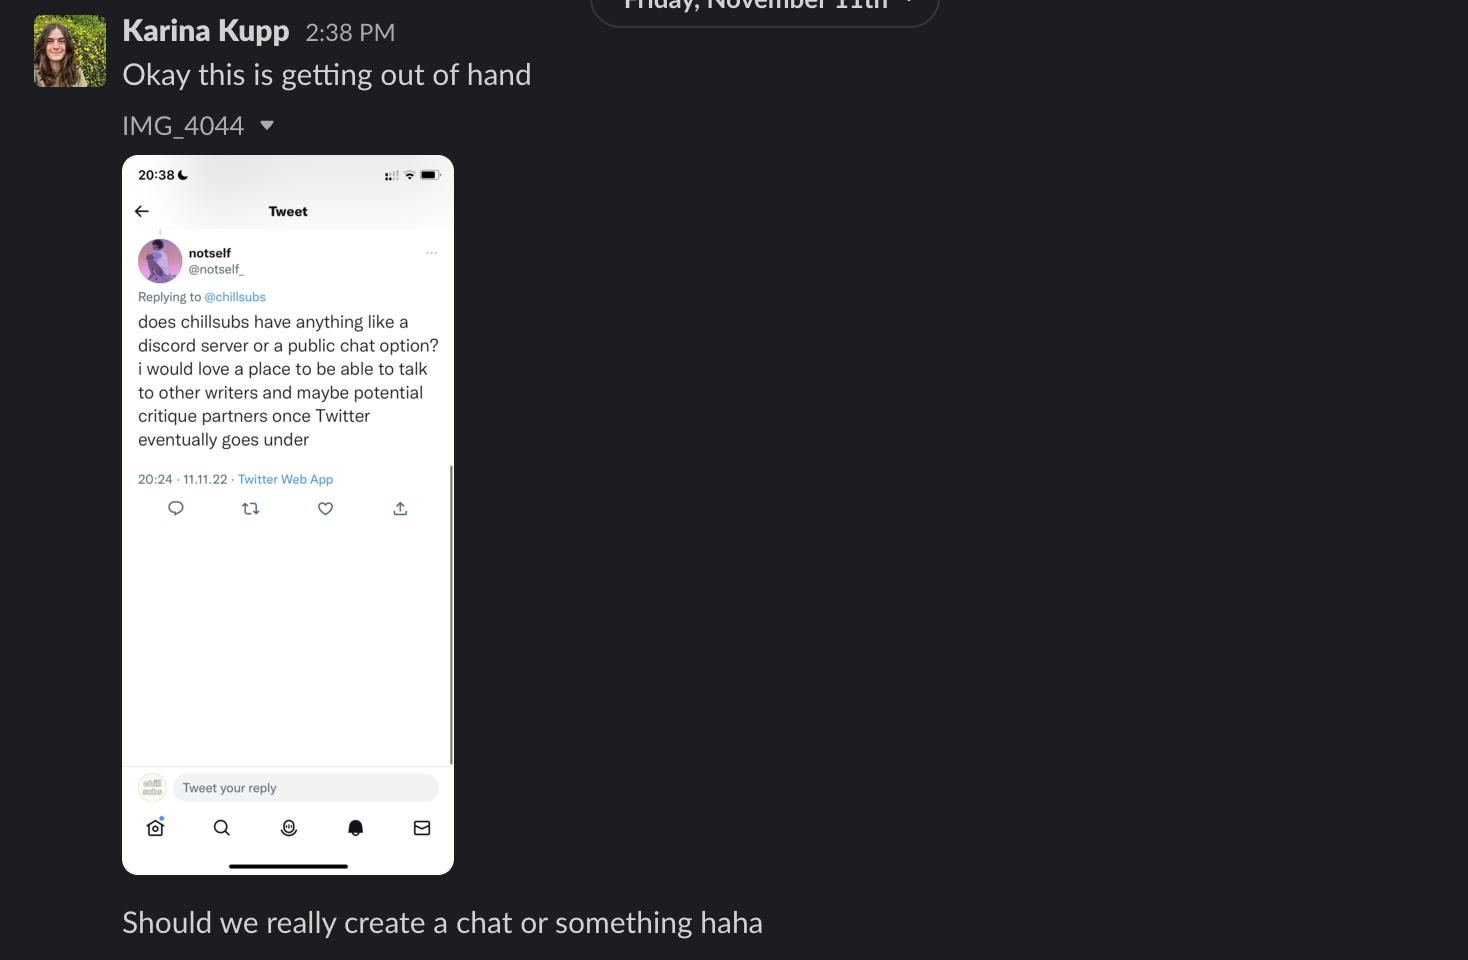 [ugh] creation story in screenshots: Karina sends Ben another tweet by someone asking us to create a social media